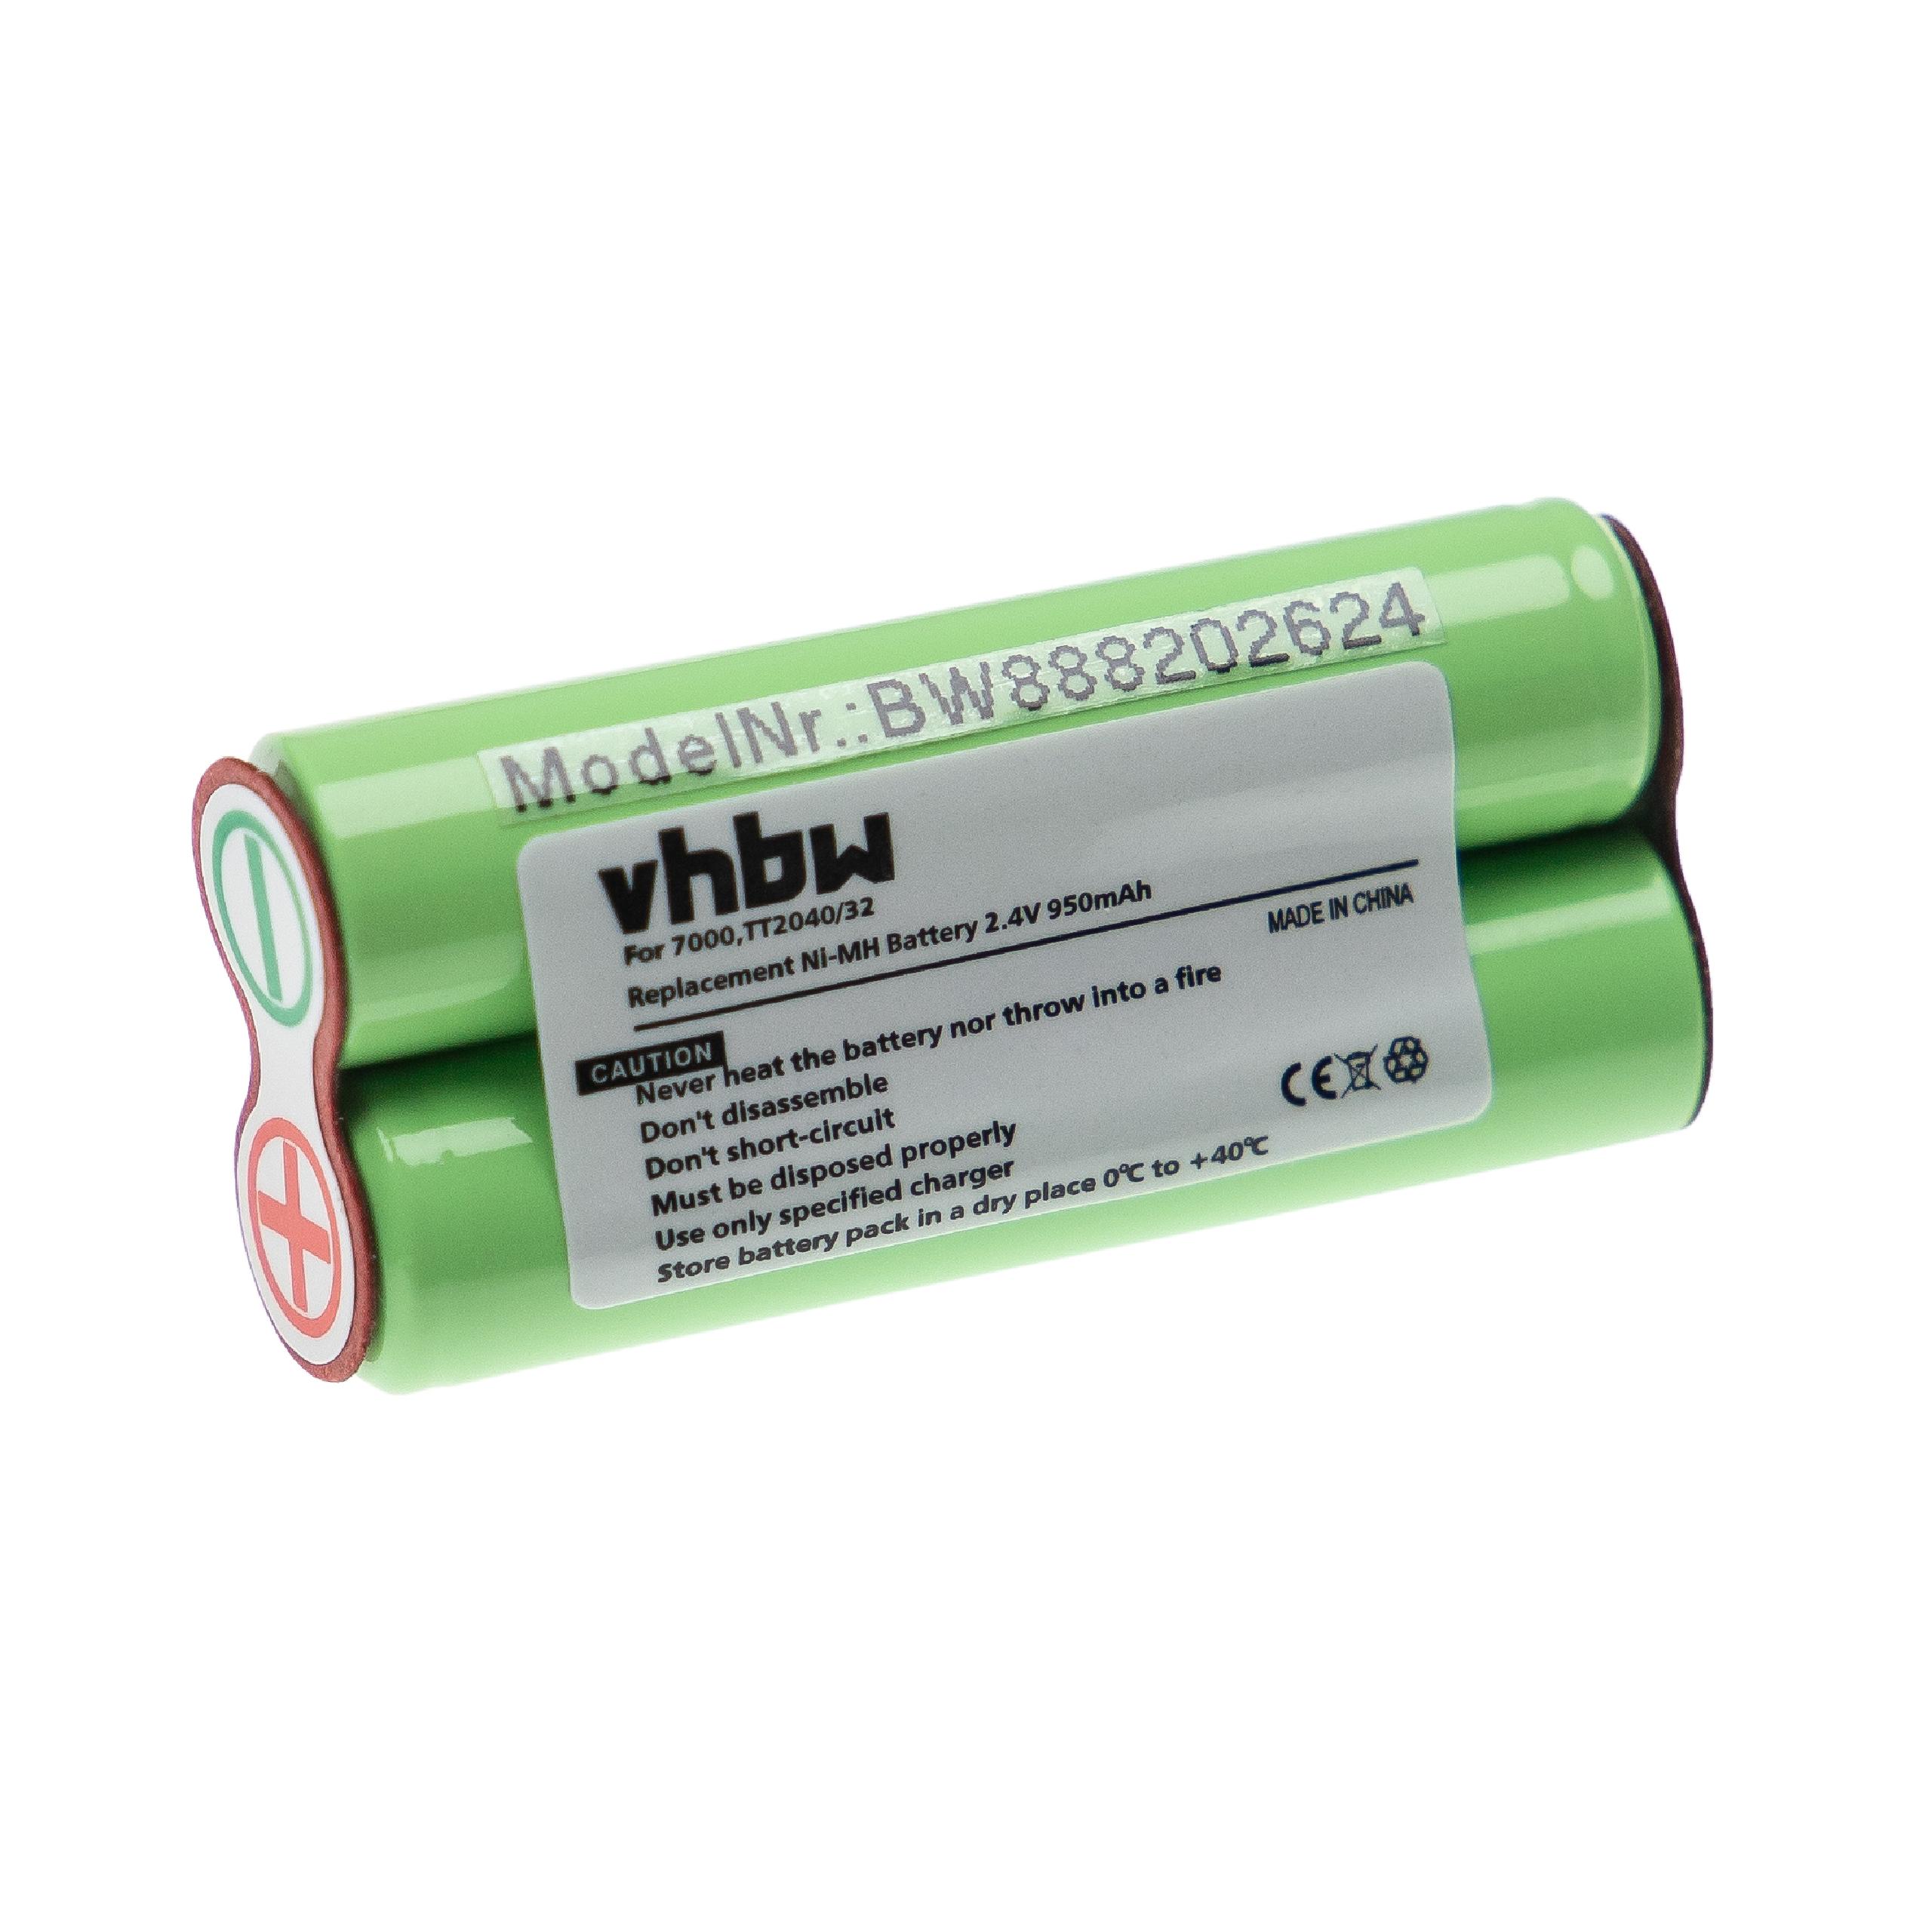 Electric Razor Battery Replacement for Philips TT2040/32 - 950mAh 2.4V NiMH